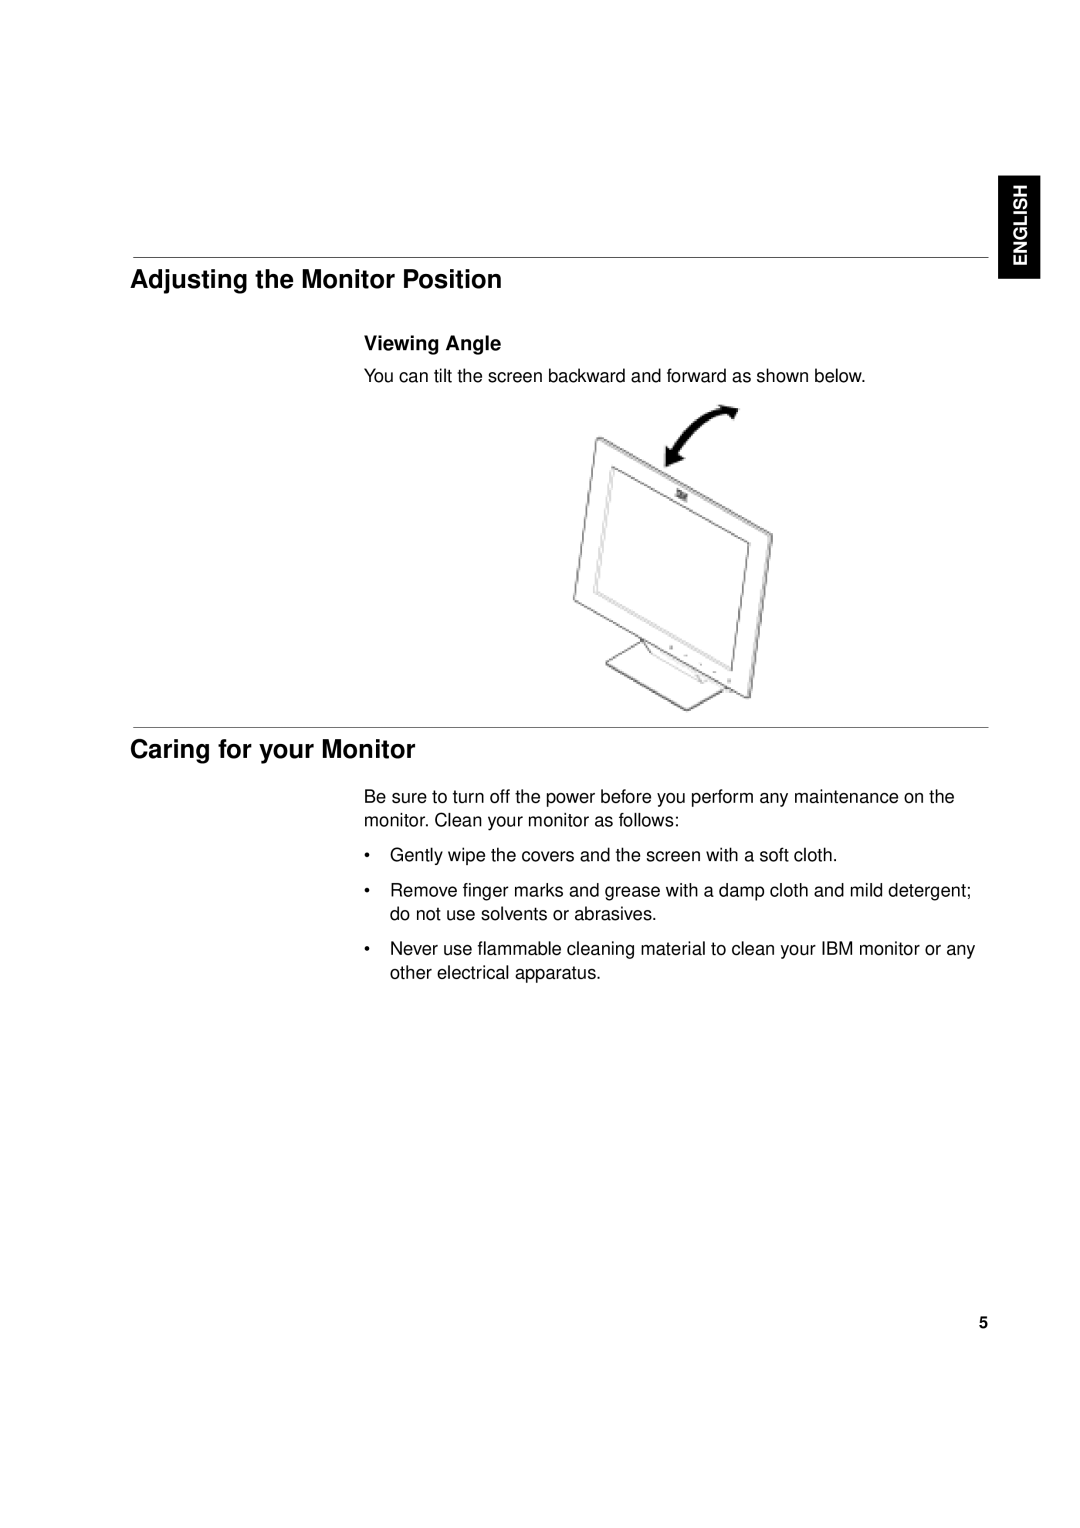 IBM T 55A manual Adjusting the Monitor Position, Caring for your Monitor, Viewing Angle 